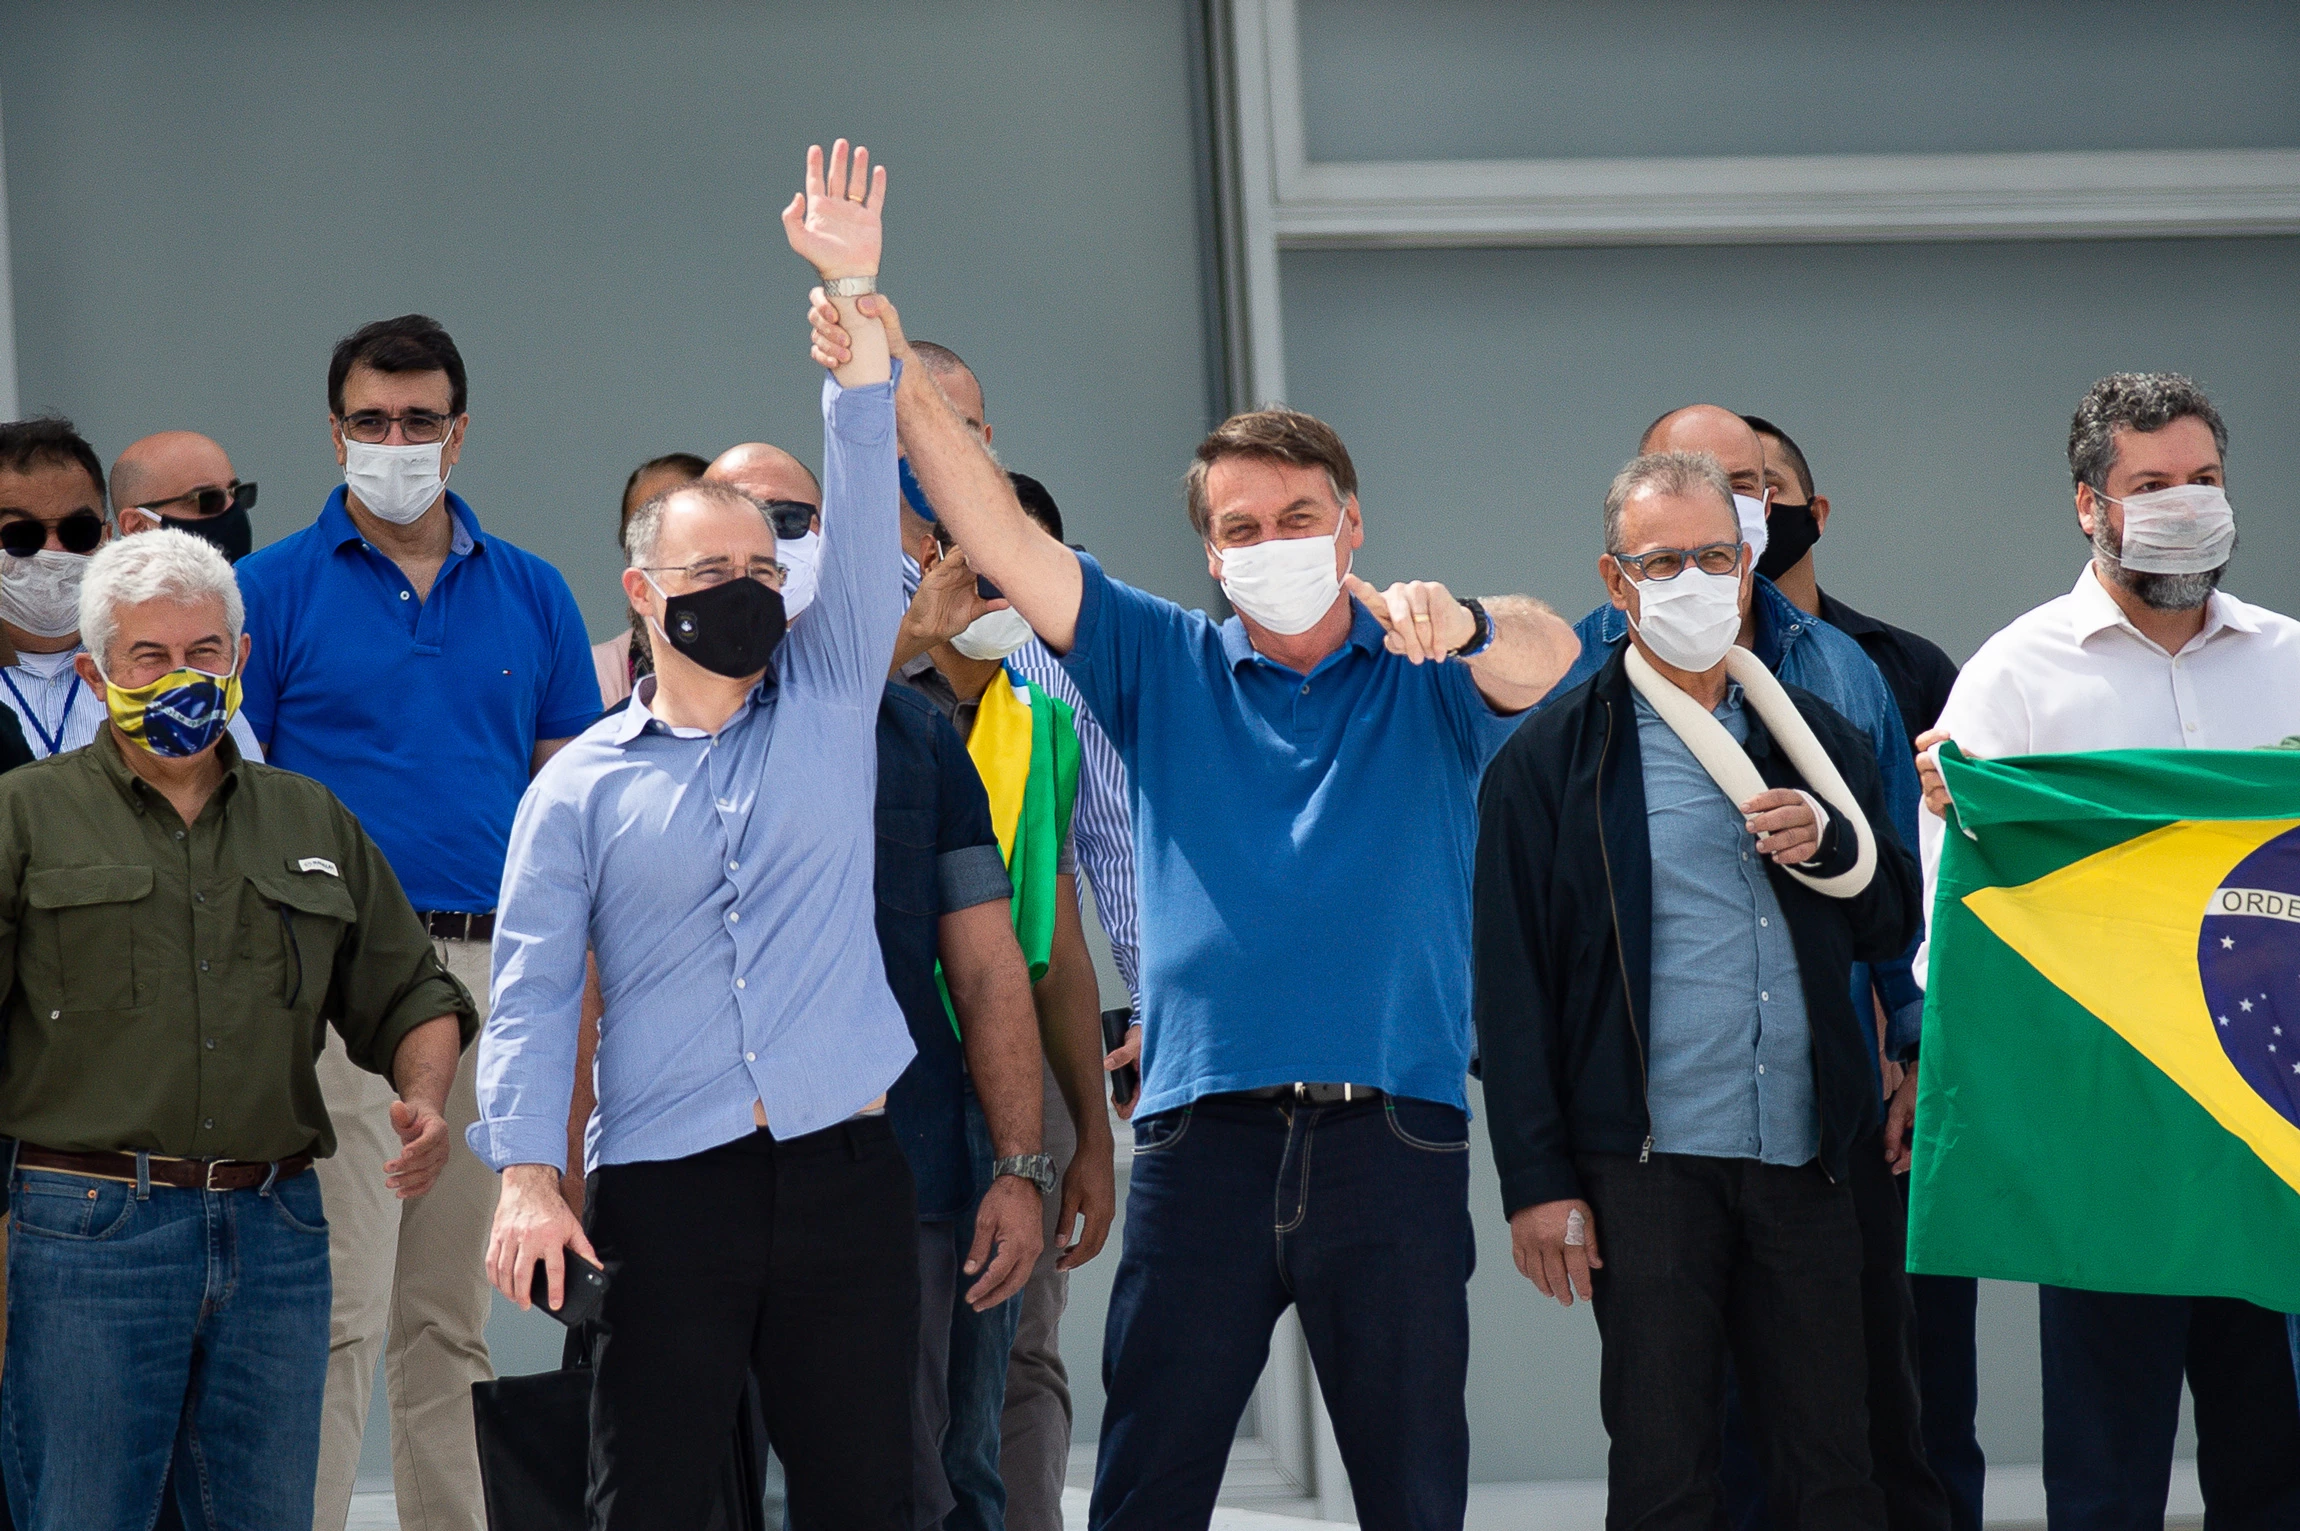 Brazilian President Jair Bolsonaro and Justice Minister André Luiz Mendonça participates in a protest against the National Congress and the Supreme Court amidst the coronavirus (COVID-19) pandemic at the Planalto Palace on May 17, 2020 in Brasilia.